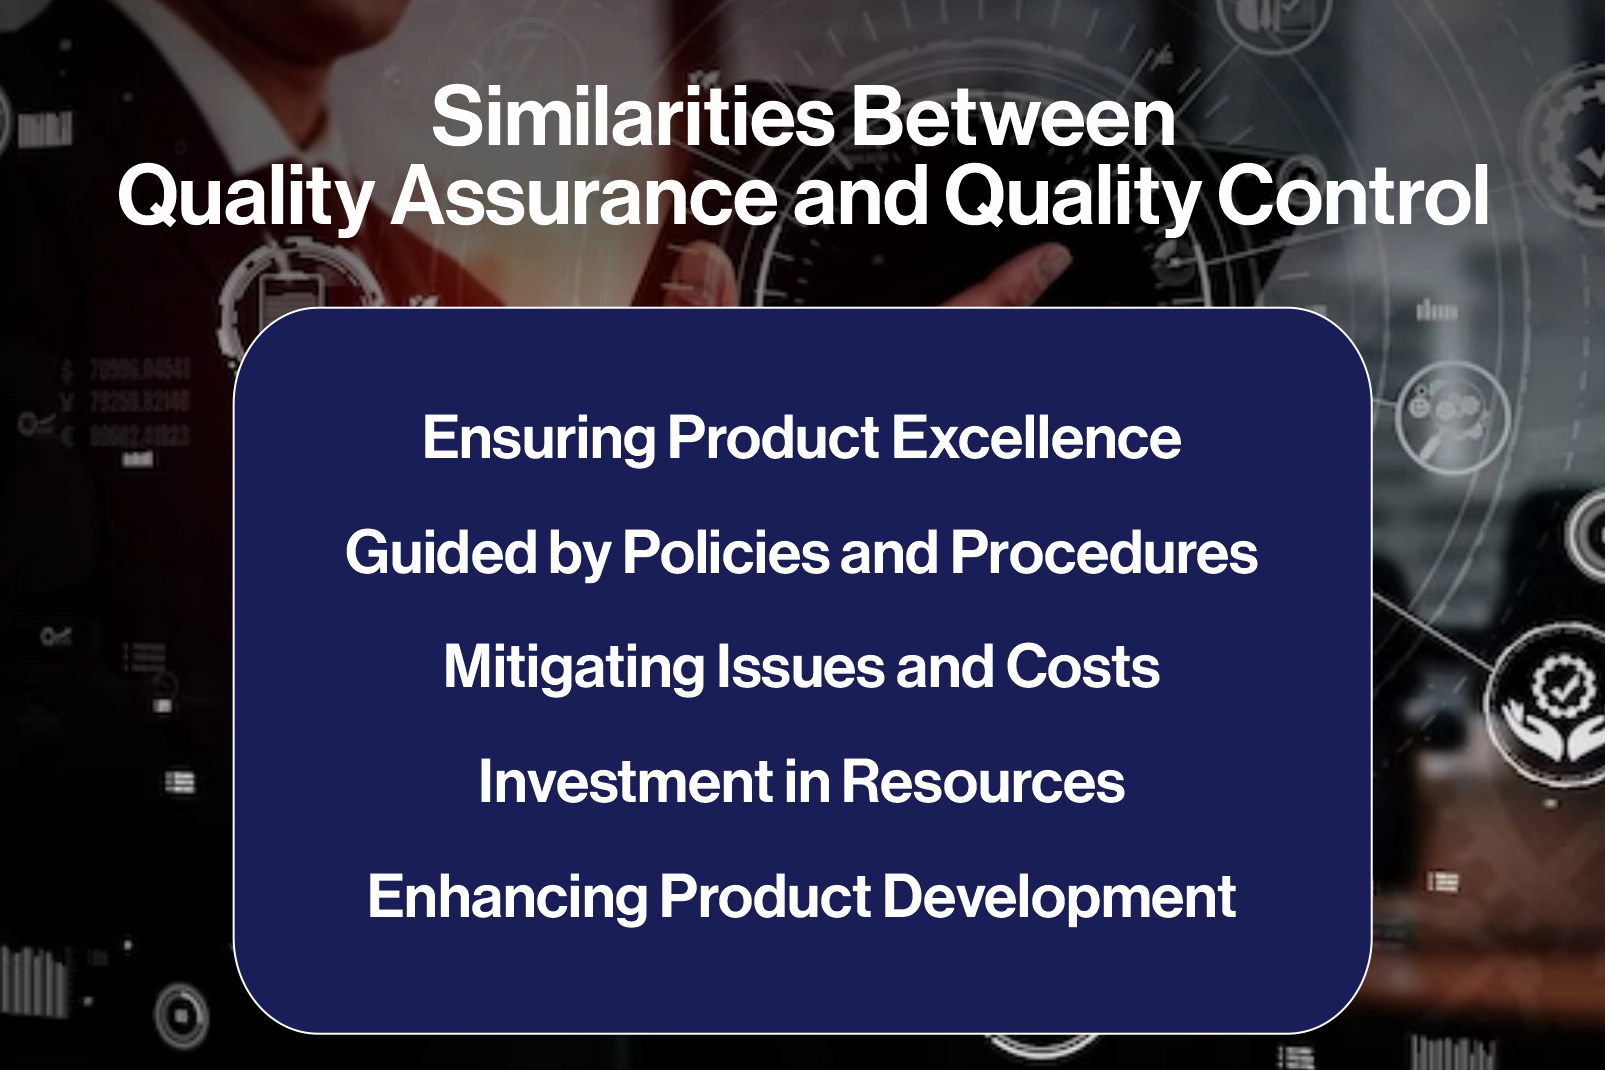 Difference between Quality Assurance and Quality Control